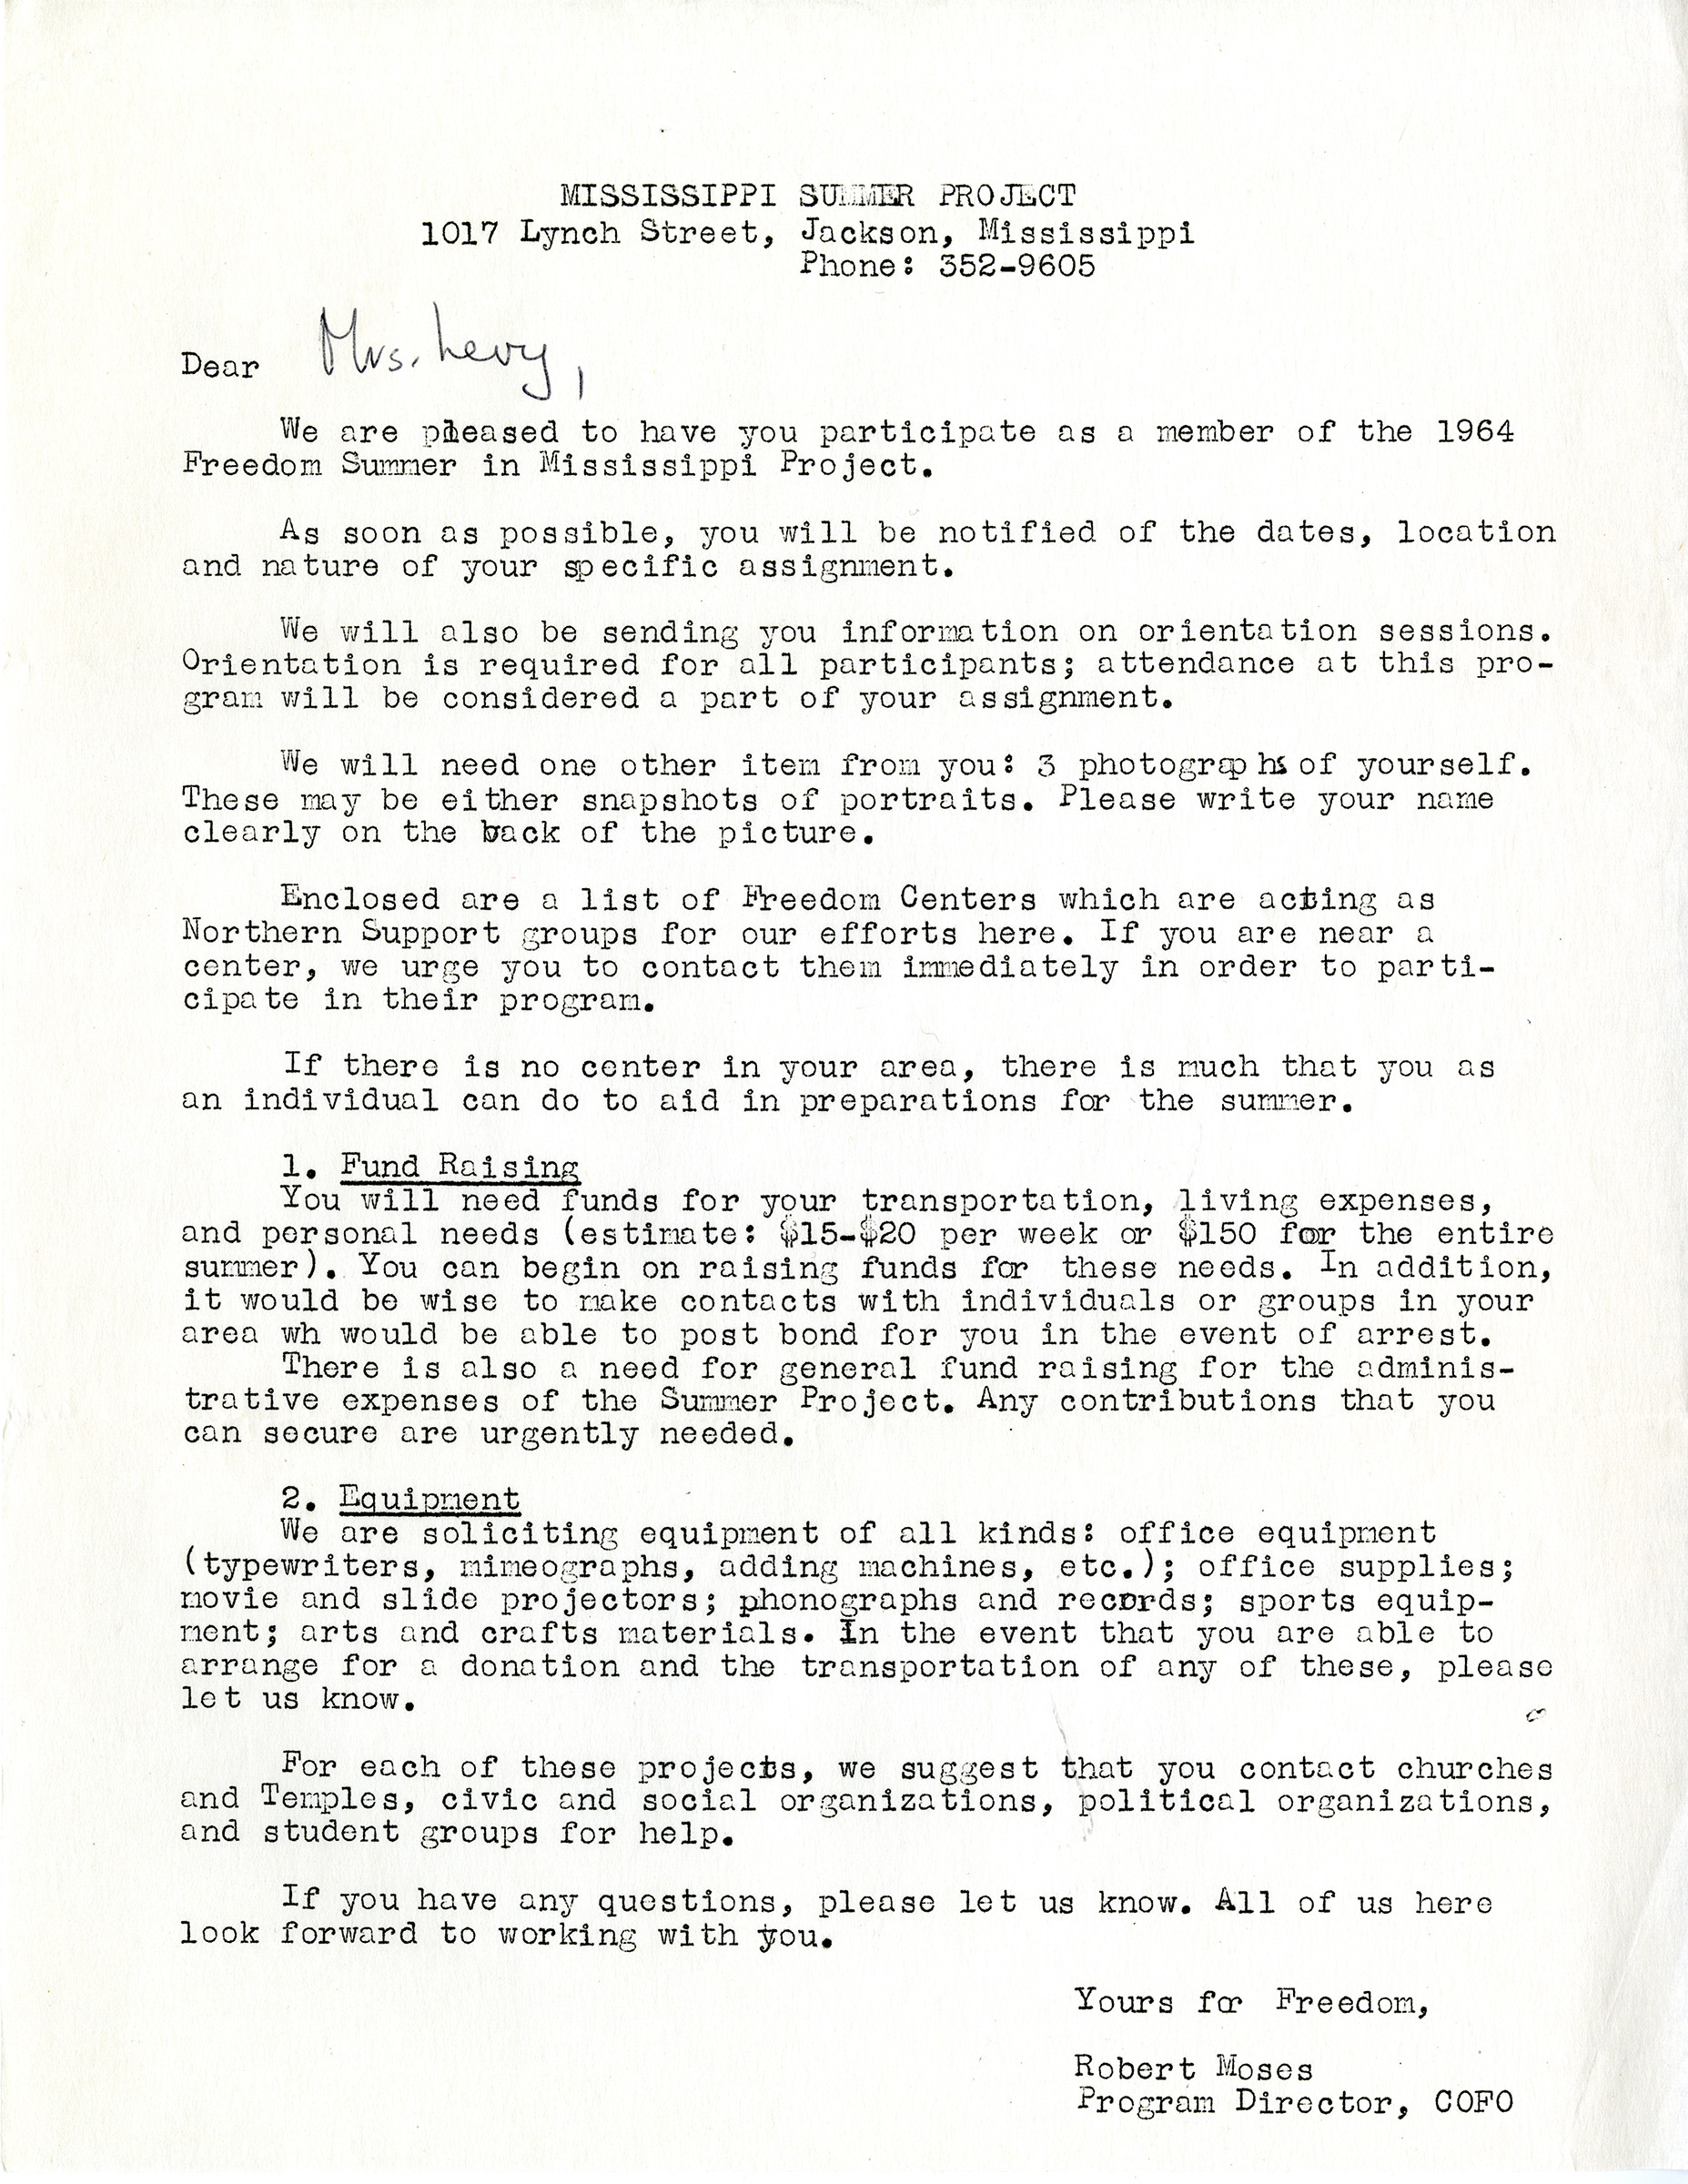 Council of Federated Organizations (COFO) acceptance letter to Betty Levy, 1964. Letter sent to Betty Levy informing her of her acceptance to the 1964 Freedom Summer Project in Mississippi. Mark Levy Collection, Queens College Special Collections and Archives.